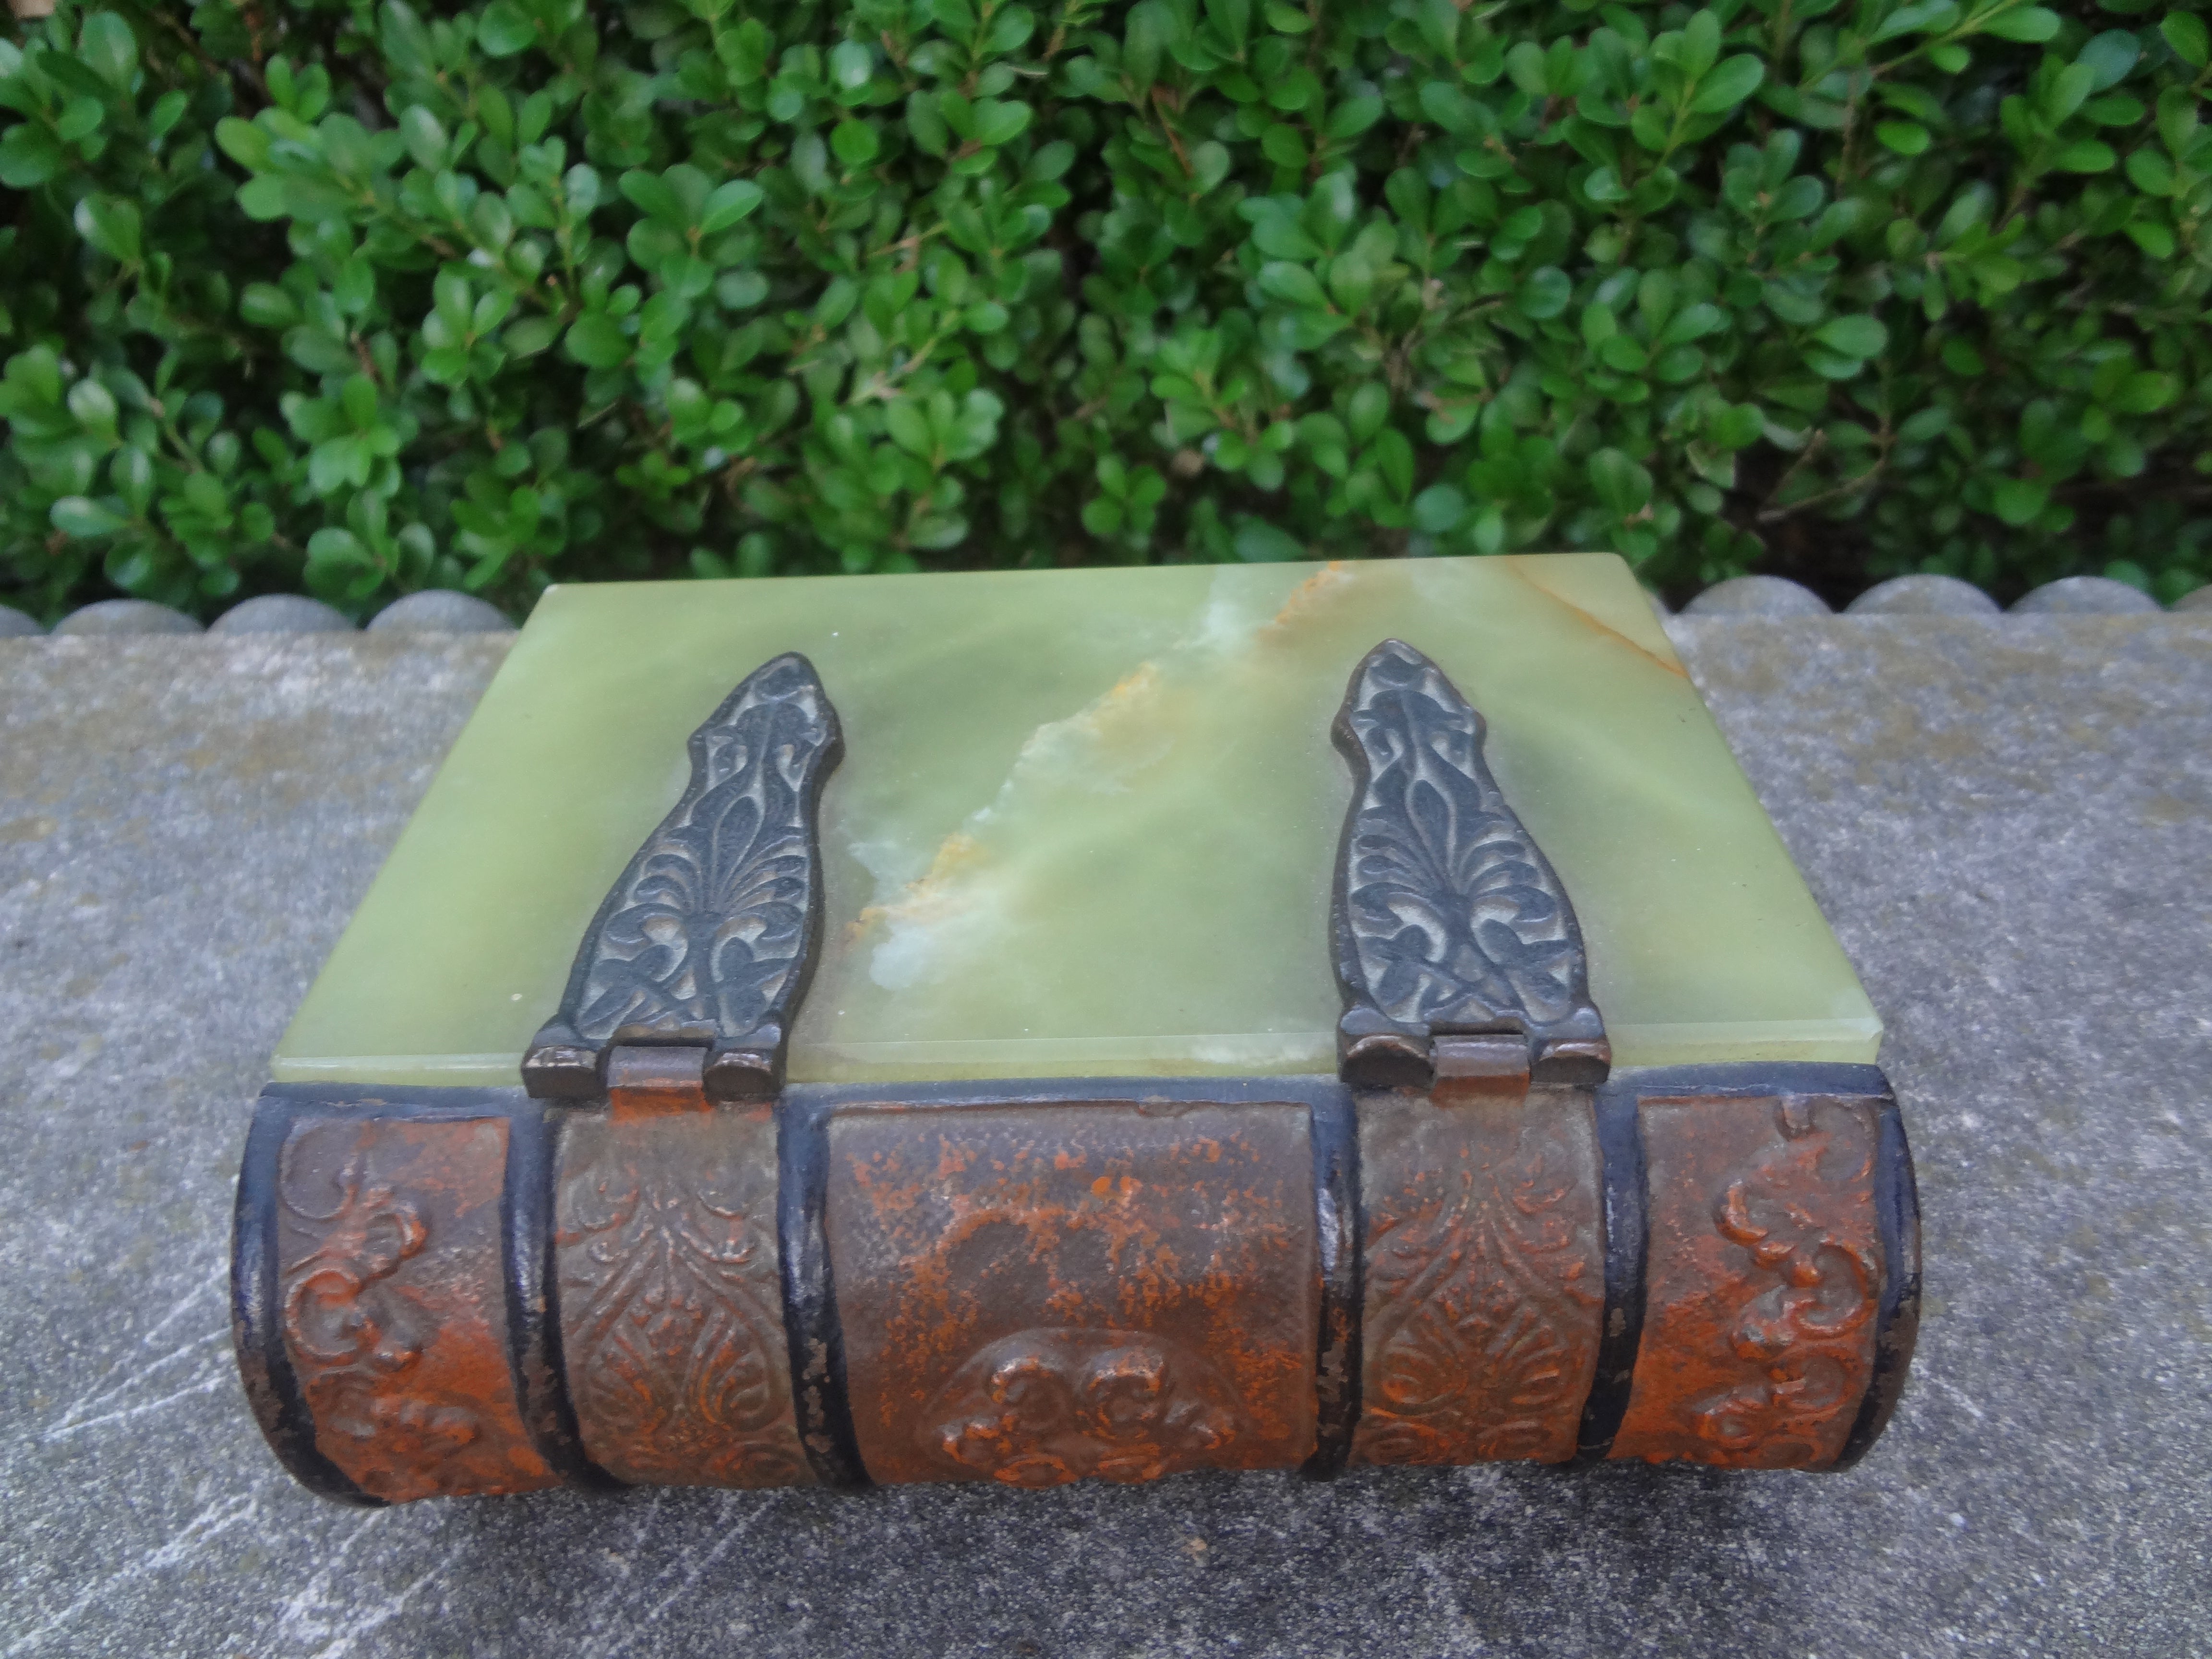 Antique Austrian Alabaster And Gilt Metal Book Box.
Unusual Austrian gilt metal and alabaster box in the form of a book.
This lovely decorative box has a wood interior and hinged lid, circa. 1920.
Great coffee table accent or box collector